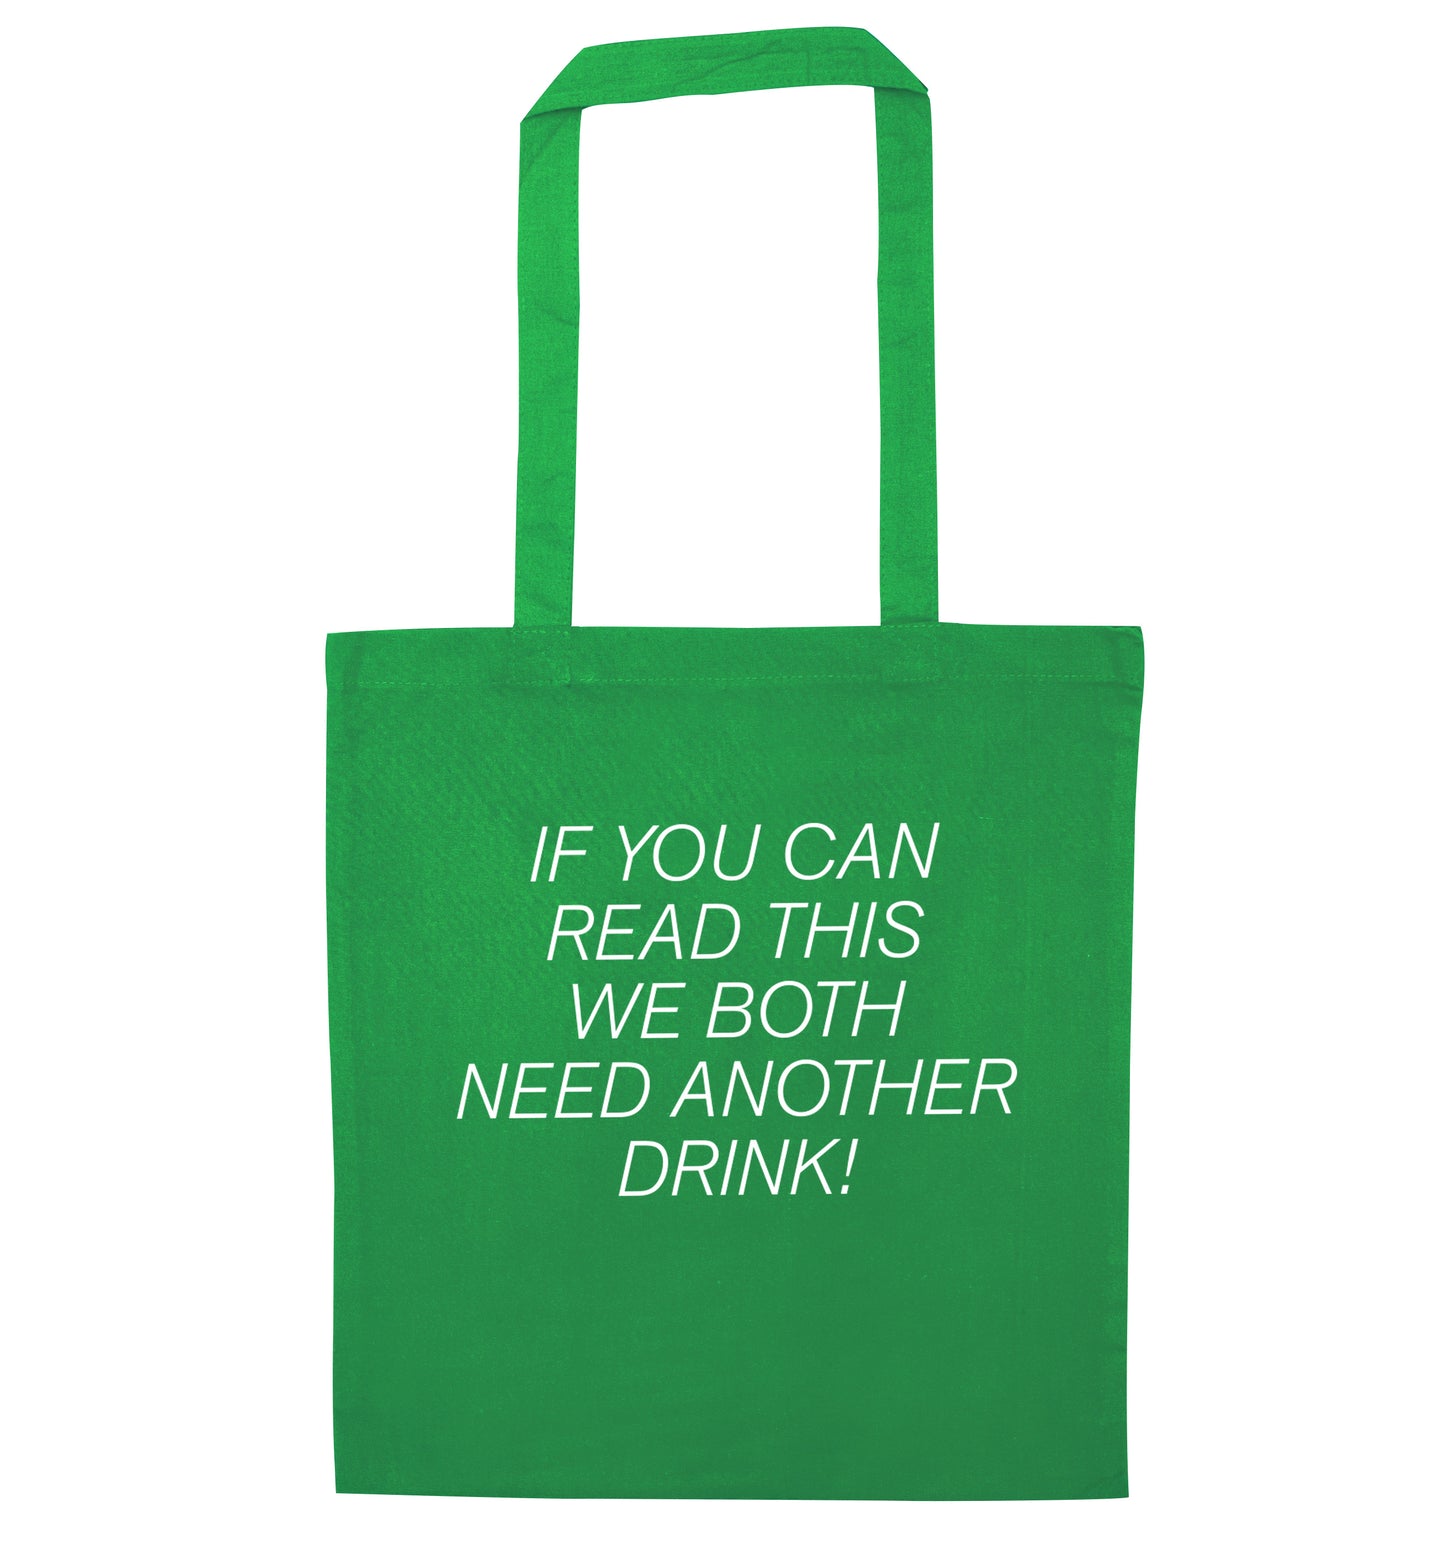 If you can read this we both need another drink! green tote bag